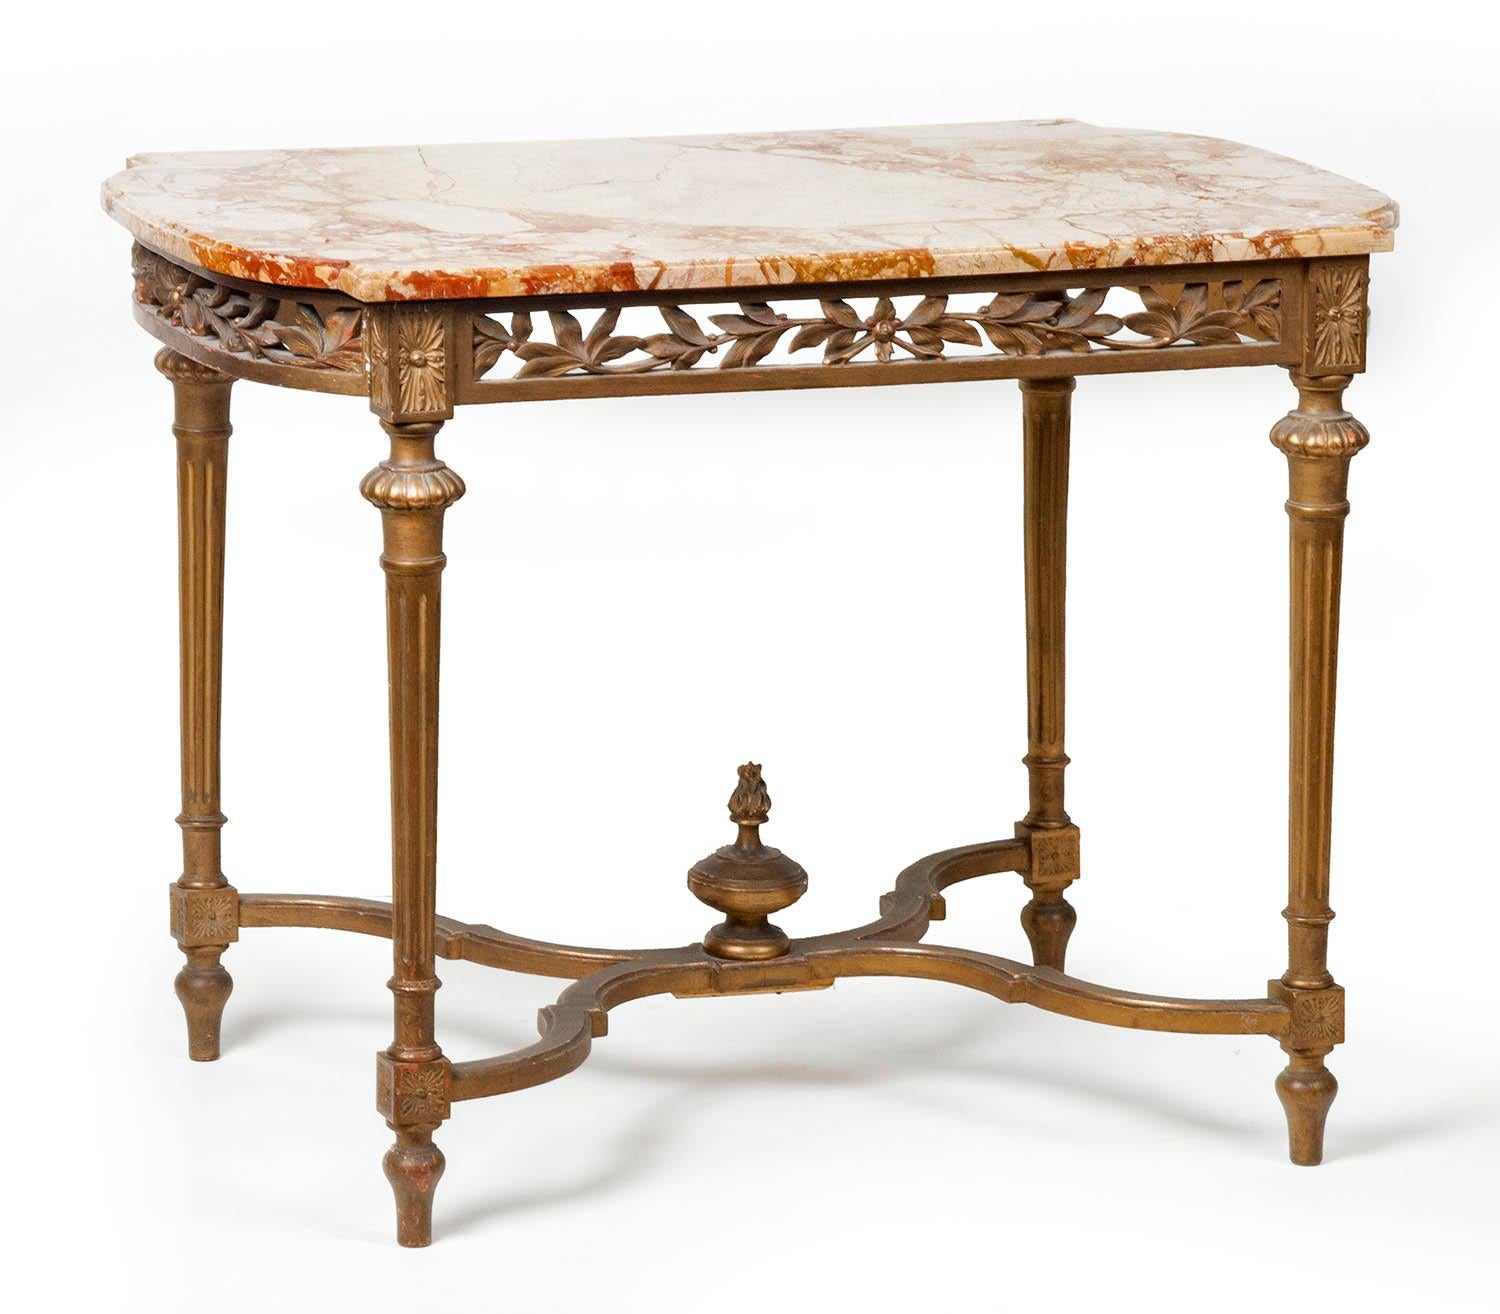 French center table with beautiful woodwork.
Made from beech wood, lightly patinated with gold paint.
The marble top has a nice profile on the edge.
The type of marble is 'Montmeyan Breccia'.
The style has characteristics of the Louis 16 style,